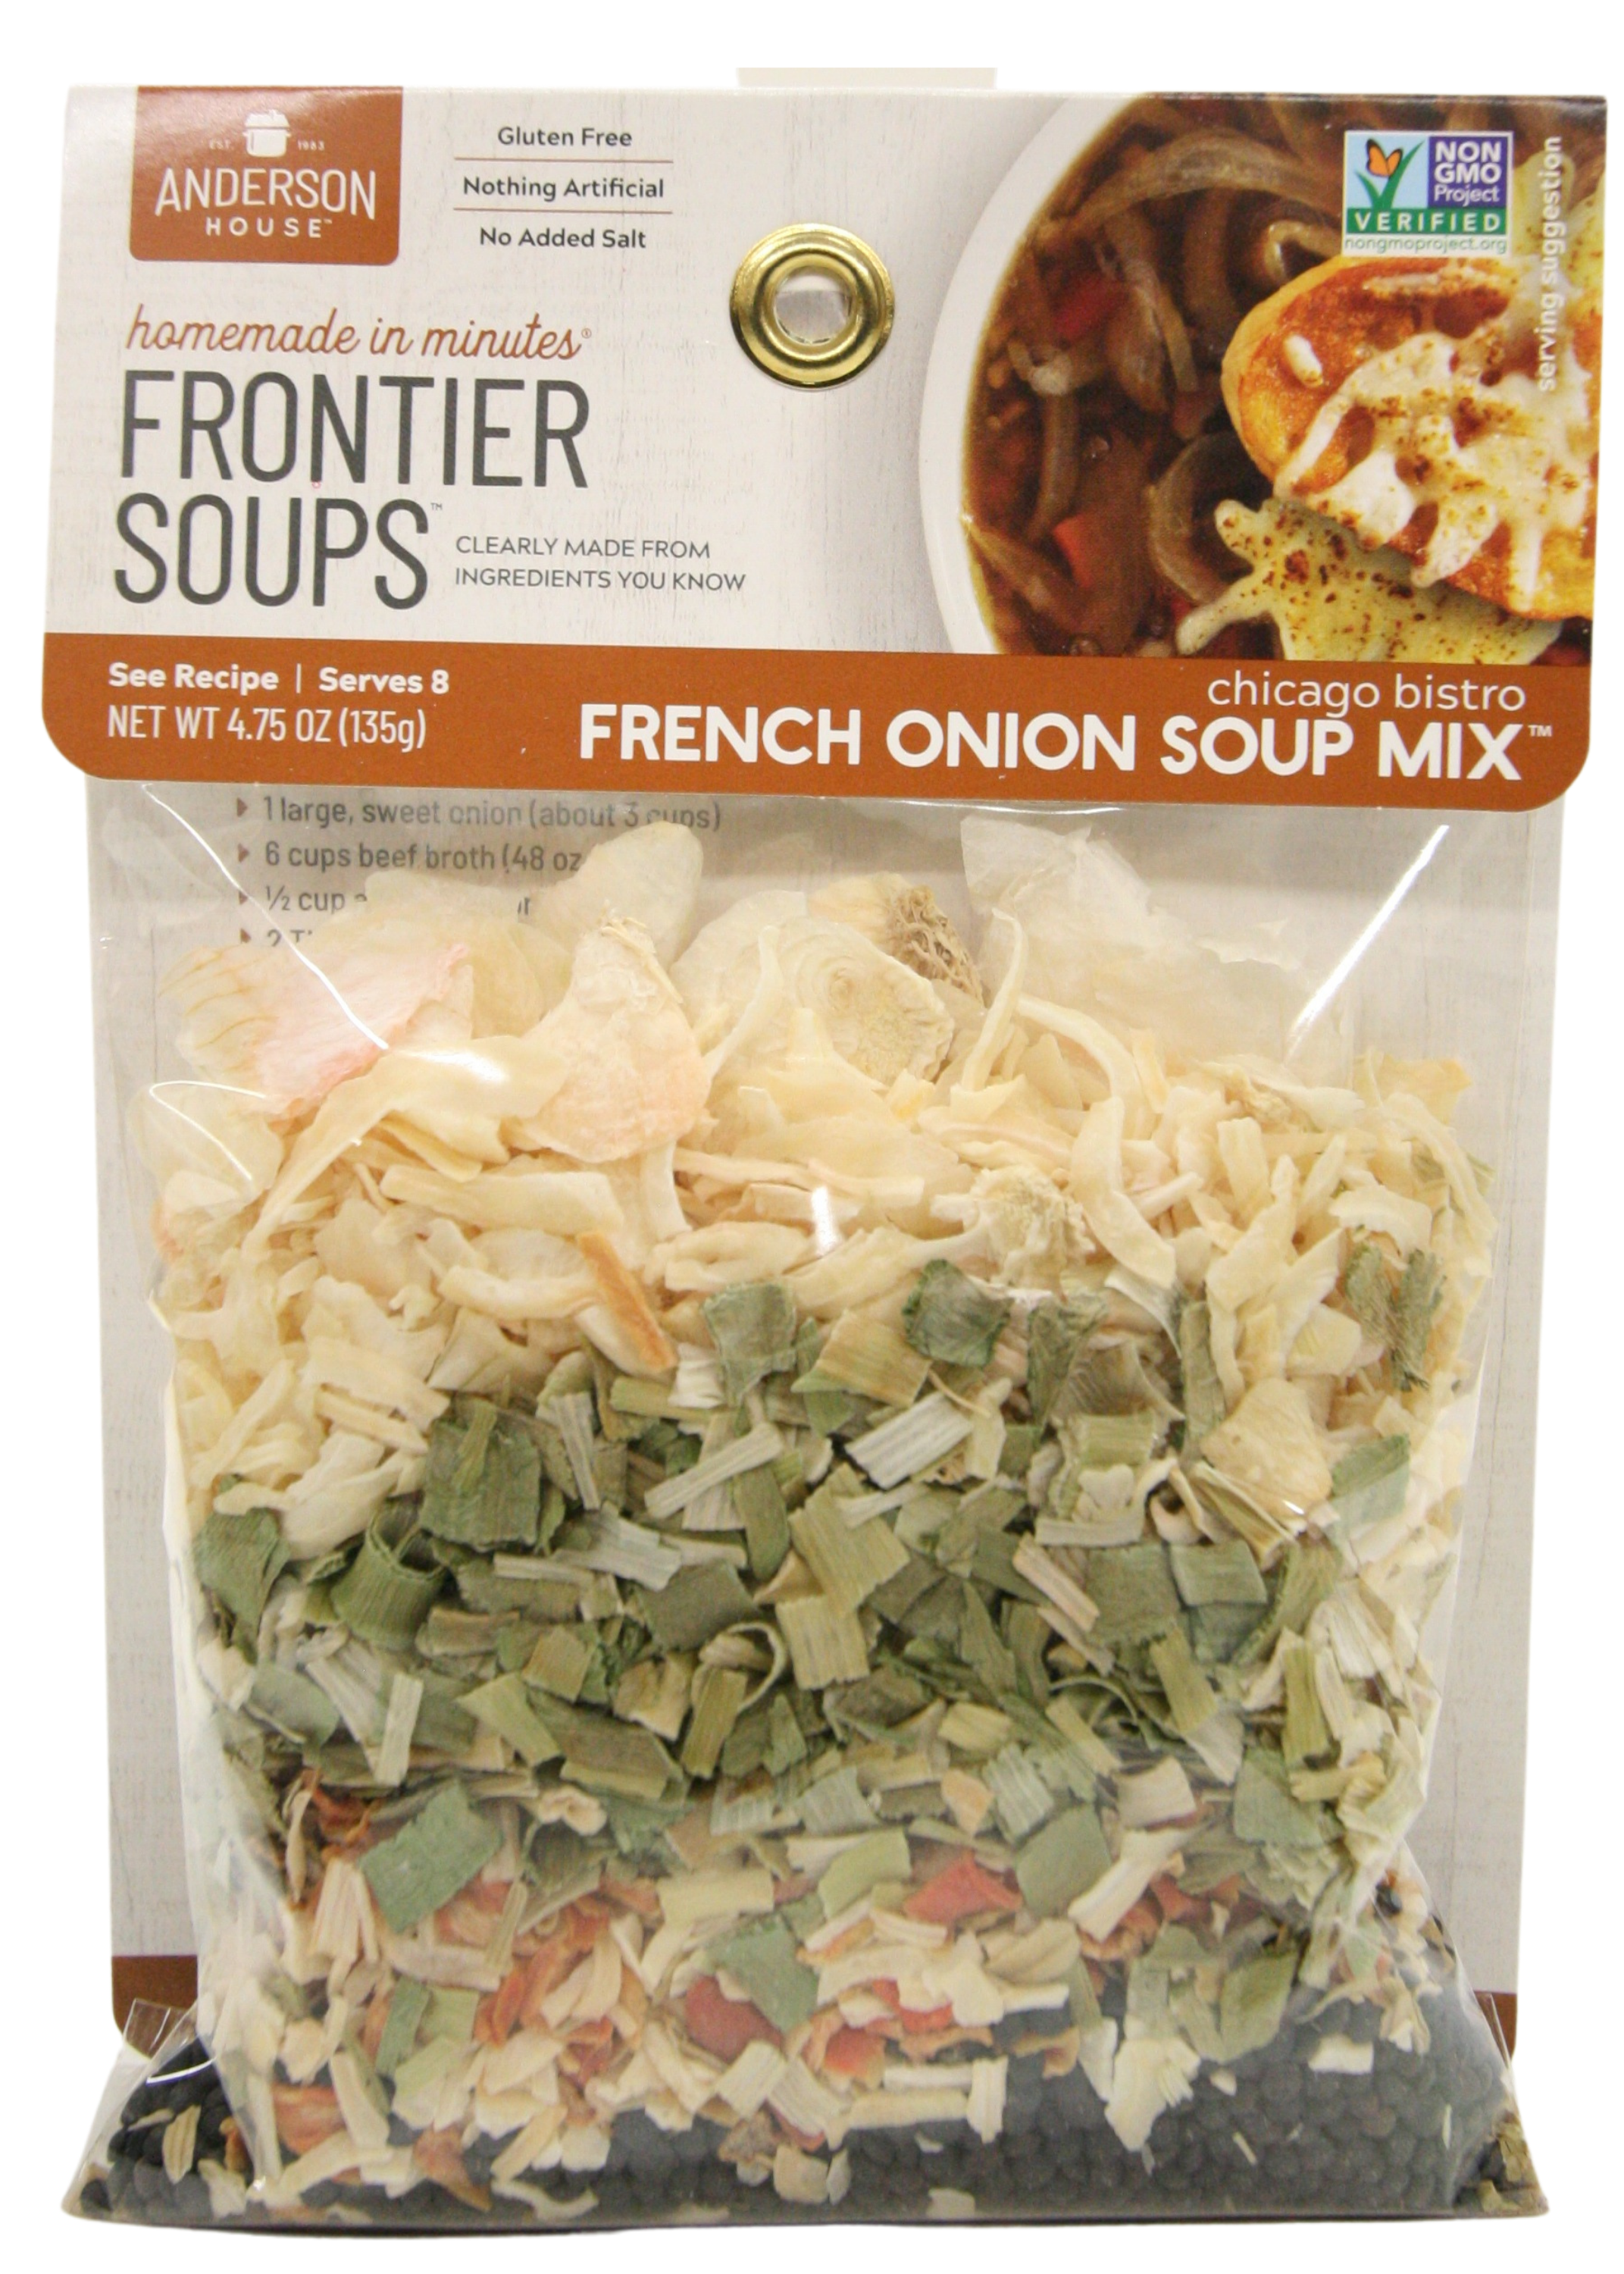 Anderson House Frontier Soups Chicago Bistro French Onion Soup Mix